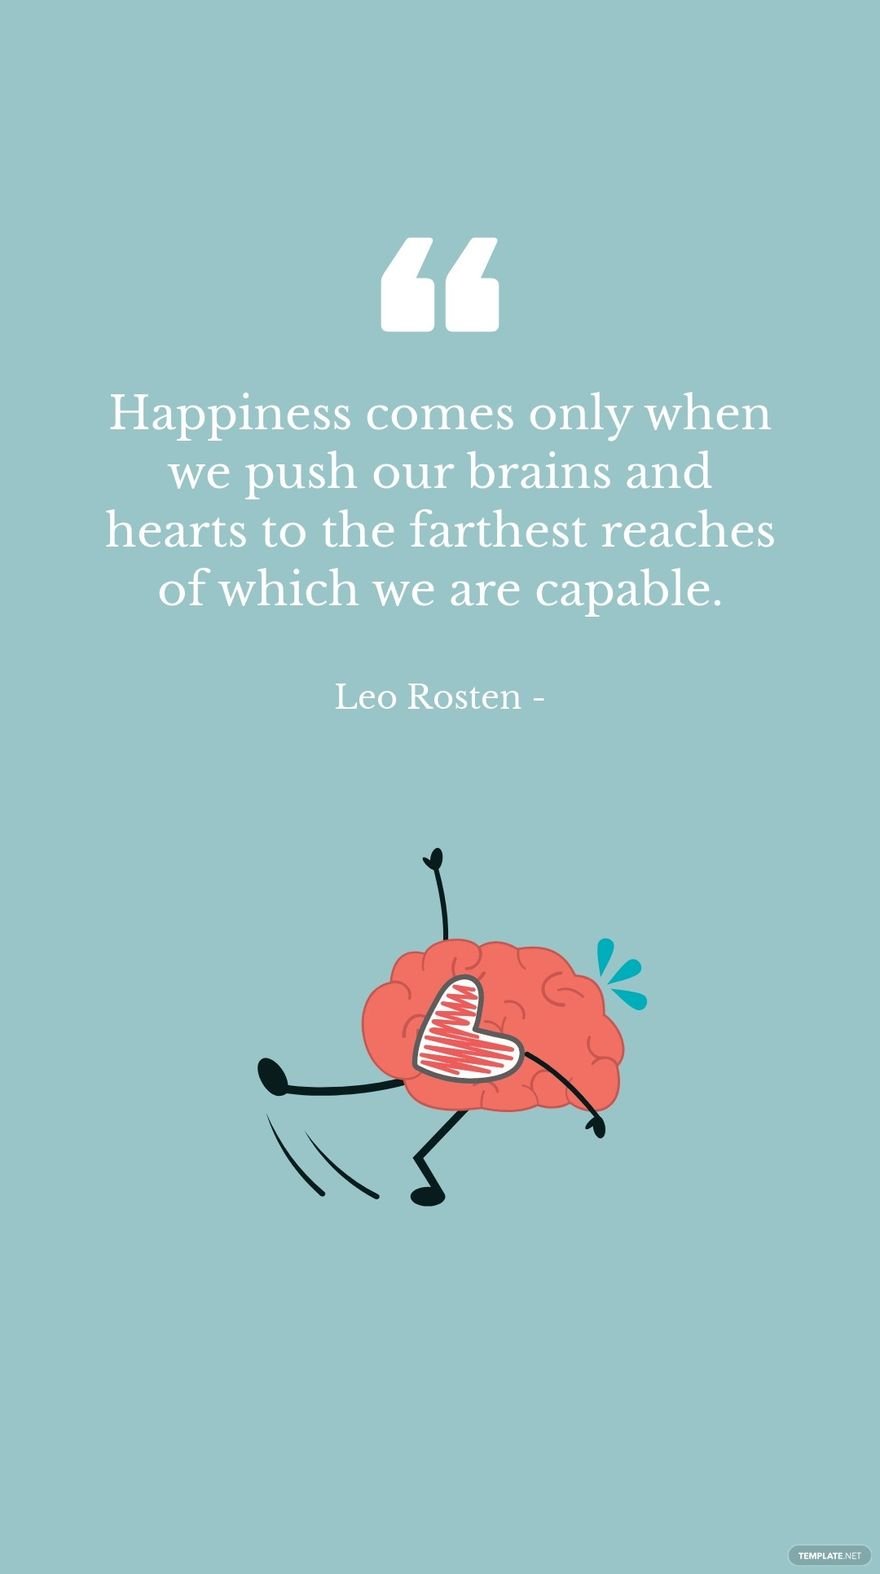 Free Leo Rosten - Happiness comes only when we push our brains and hearts to the farthest reaches of which we are capable. in JPG